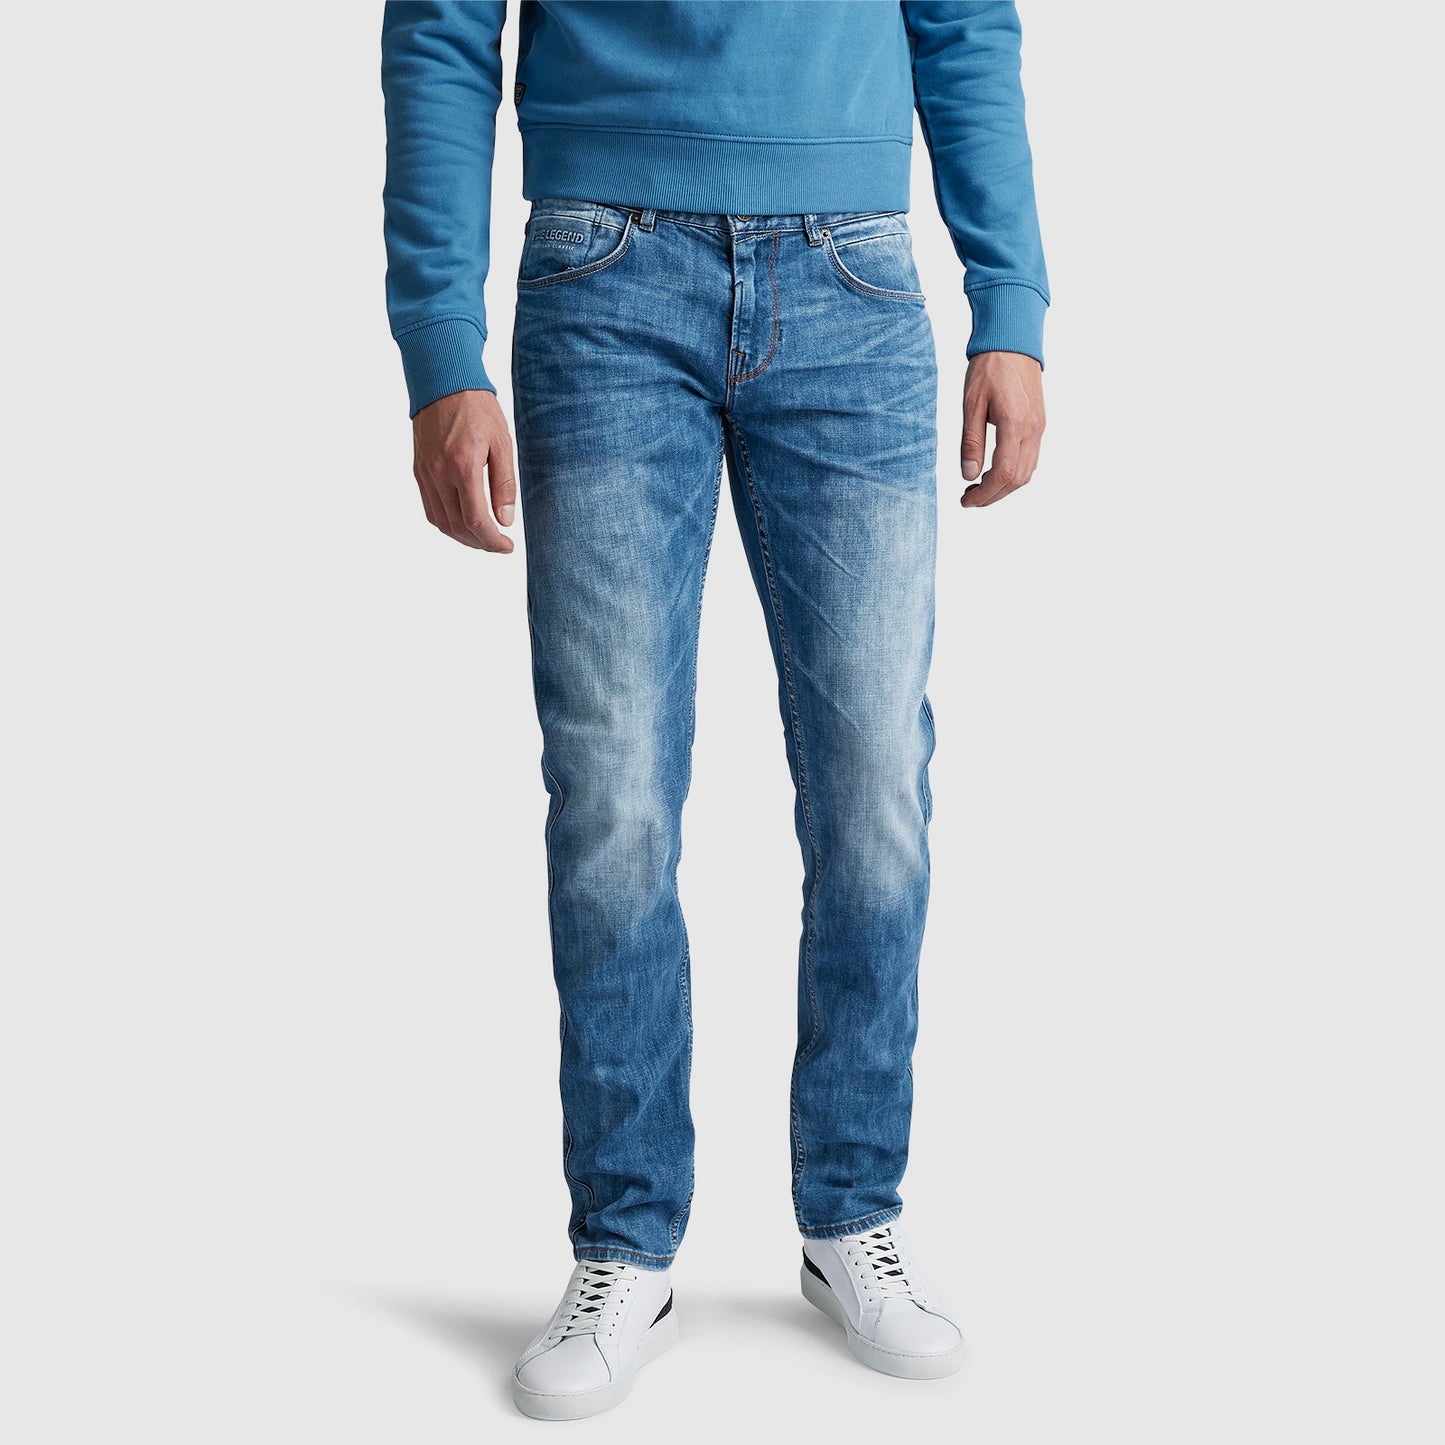 PME LEGEND NIGHTFLIGHT JEANS Pigment Printed Dobby (Fbs)